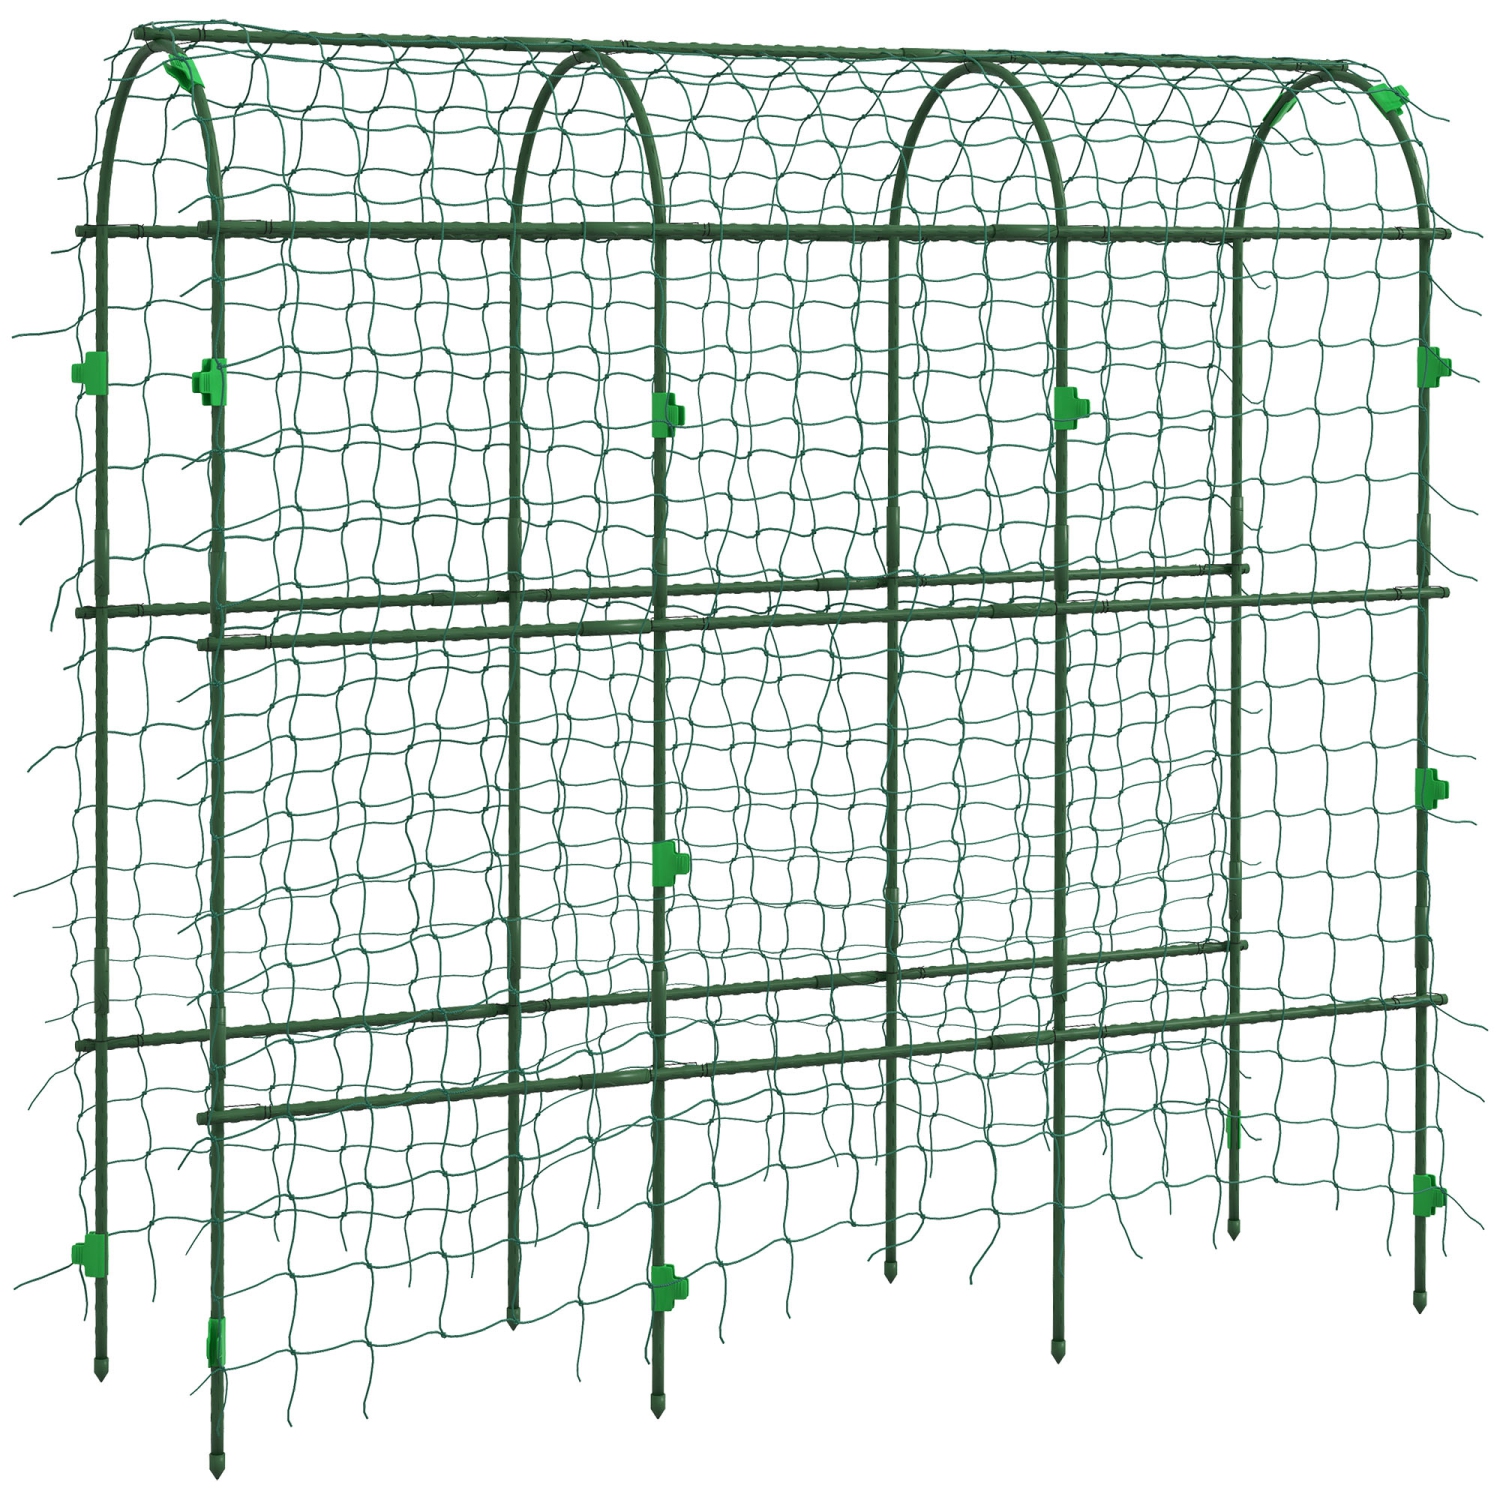 Outsunny Cucumber Trellis, 6ft Tall Garden Arch Trellis for Climbing Plants Outdoor, A-Frame, with PE Coated Steel Structure and Climbing Net, Support Vegetables Peas Fruits Vines